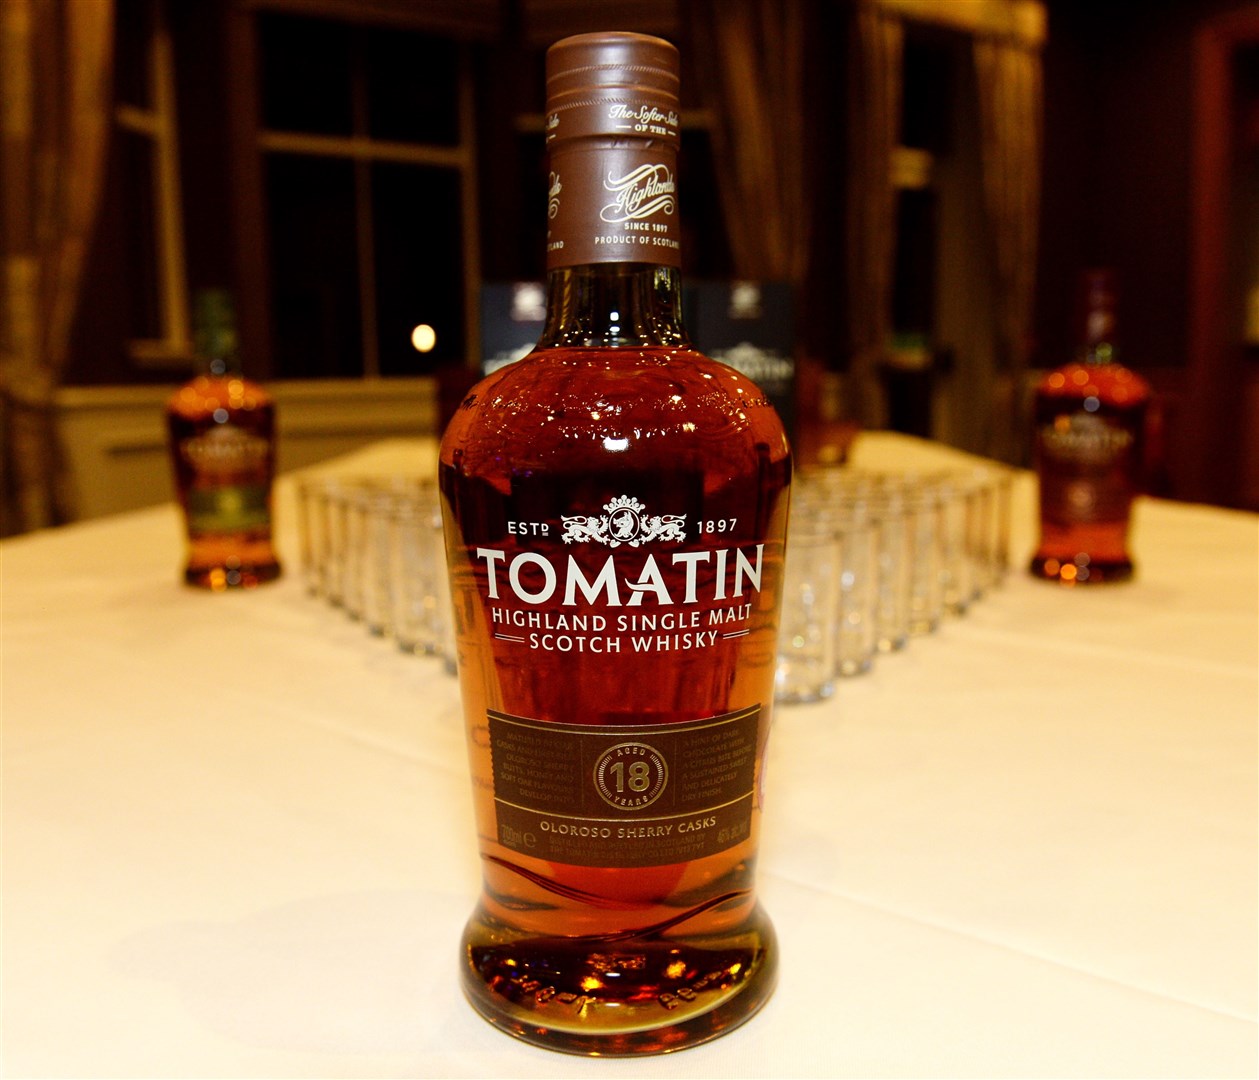 Tomatin Distillery has lodged the legal action against Tomatin Trading Company, arguing the village name is 'inherently associated' with its brand.